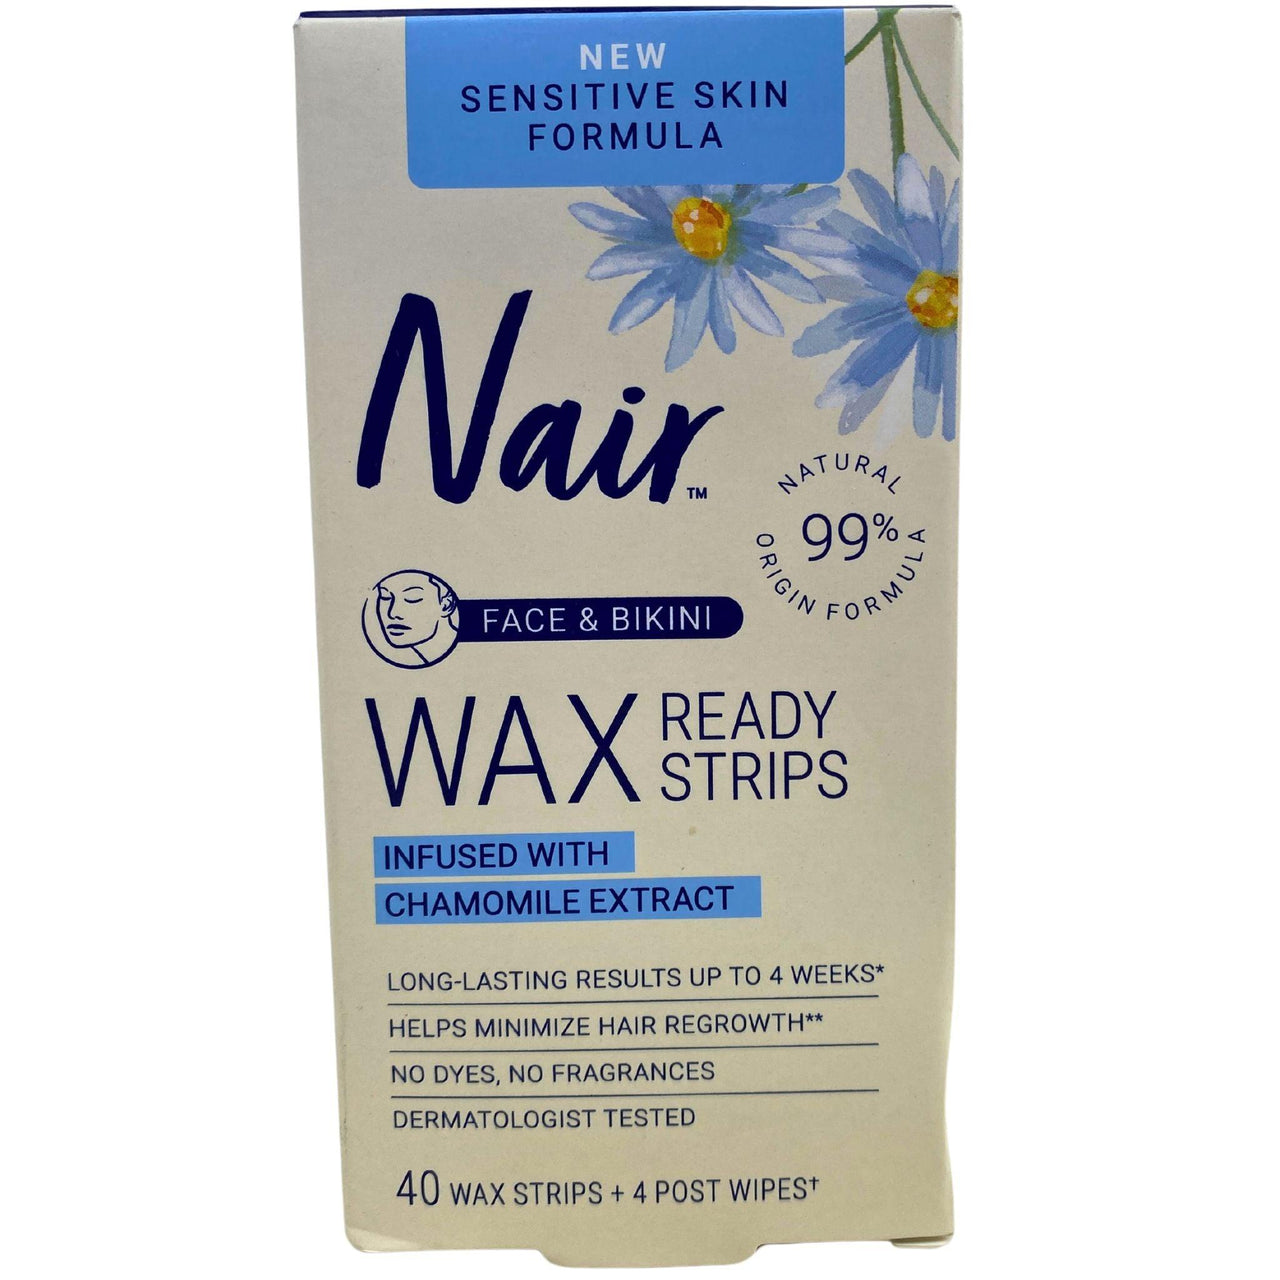 Nair Face & Bikini Wax Ready Strips Infused with Chamomile Extract New Sensitive Formula (40 Pcs Lot) - Discount Wholesalers Inc